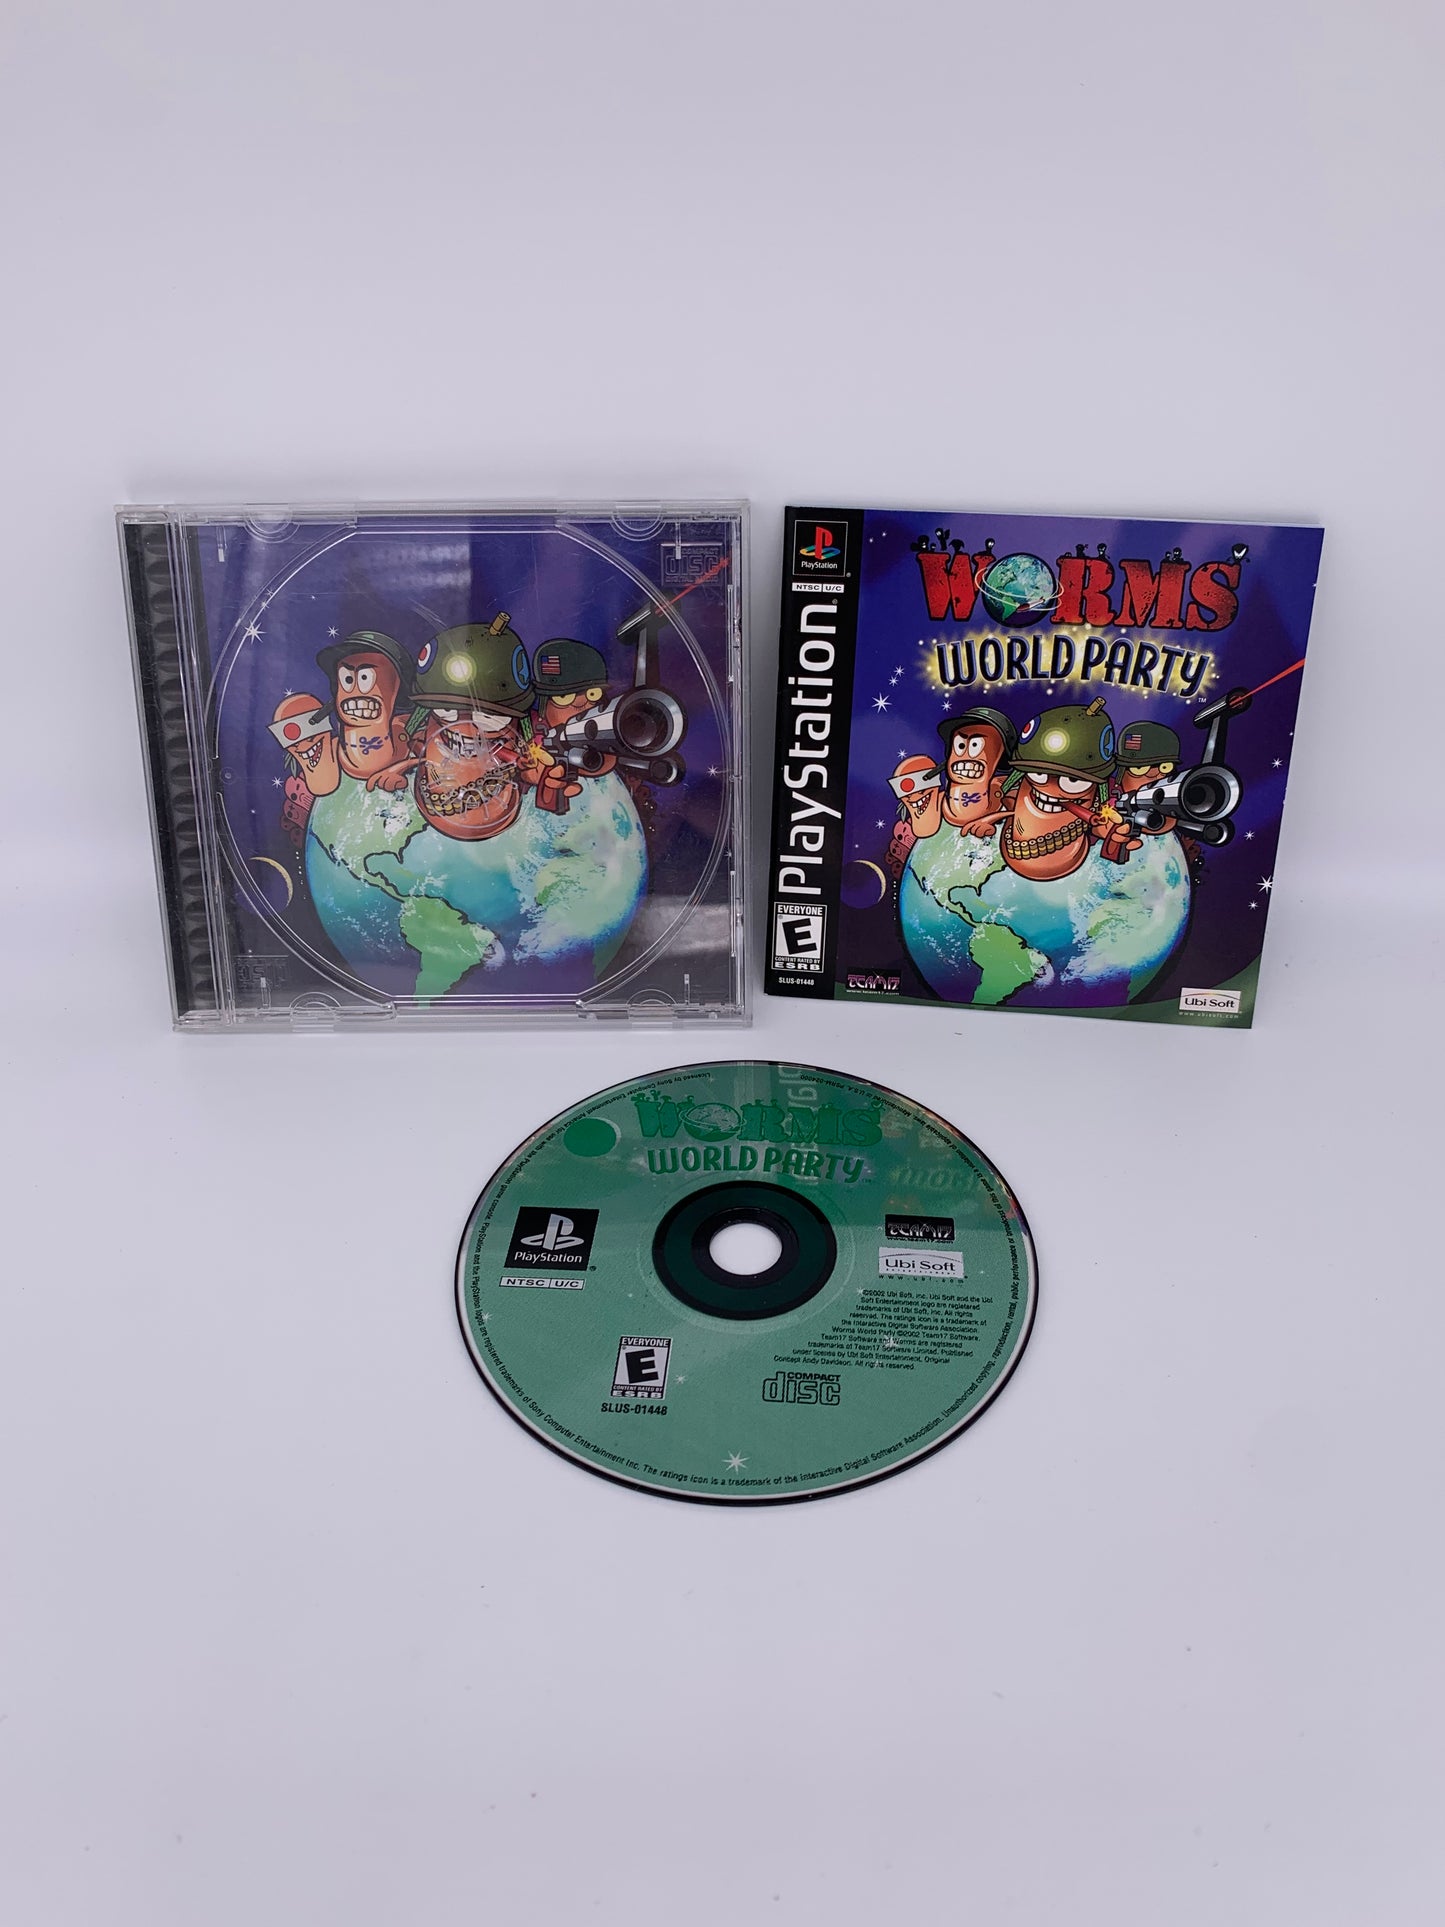 PiXEL-RETRO.COM : SONY PLAYSTATION (PS1) COMPLETE CIB BOX MANUAL GAME NTSC WORMS WORLD PARTY